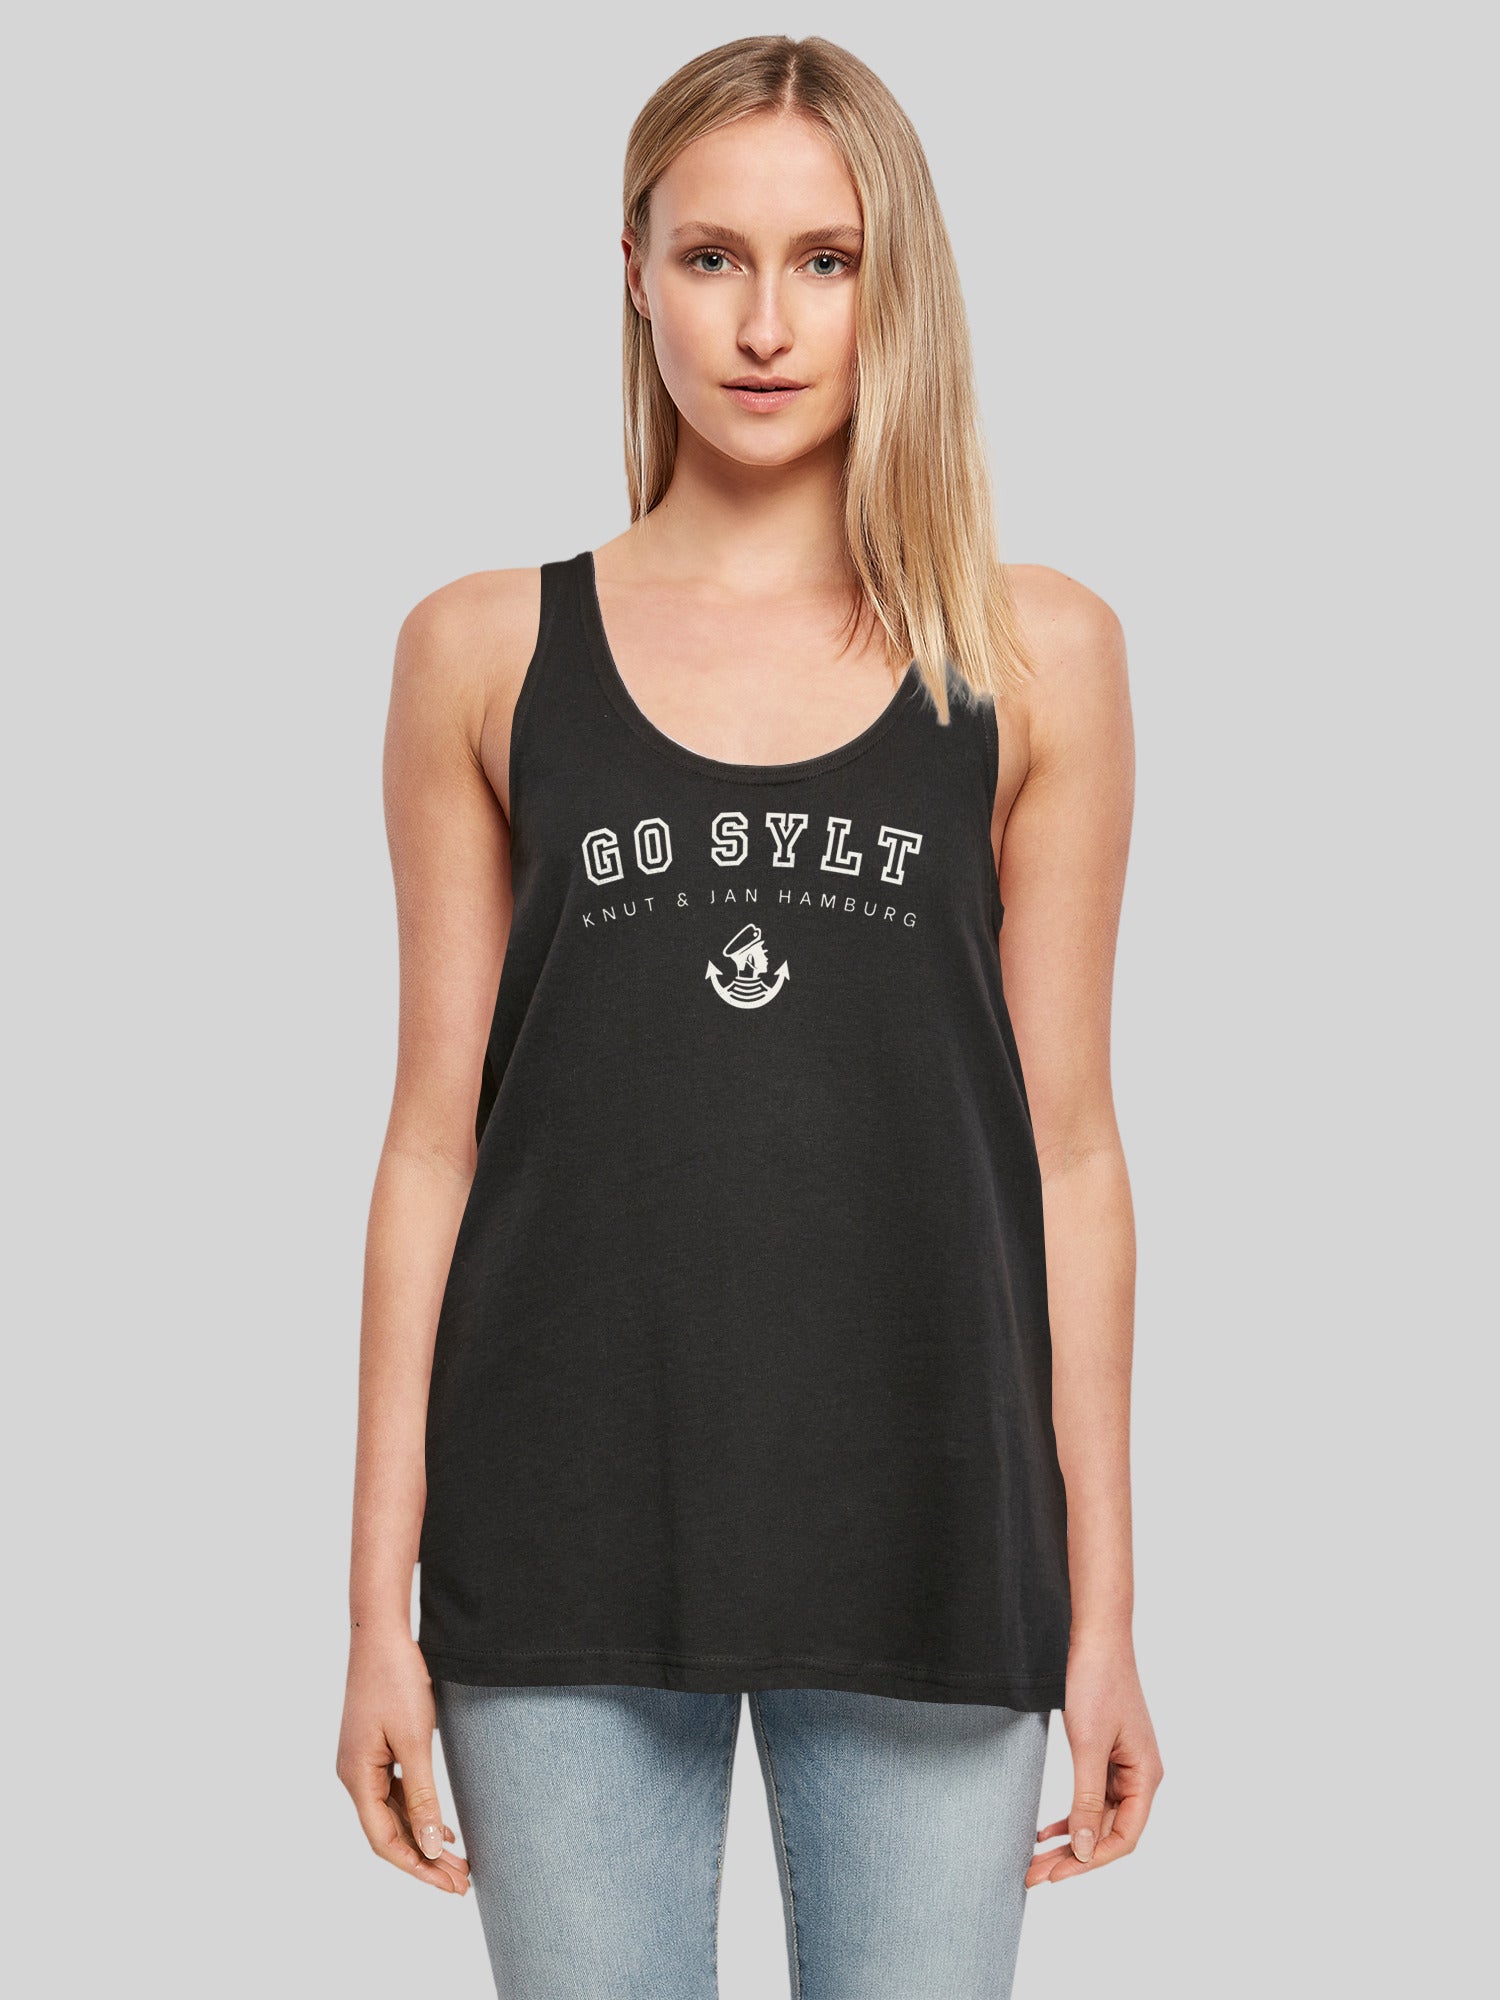 Crest Queen with Ladies Blk – Classic F4NT4STIC Tanktop